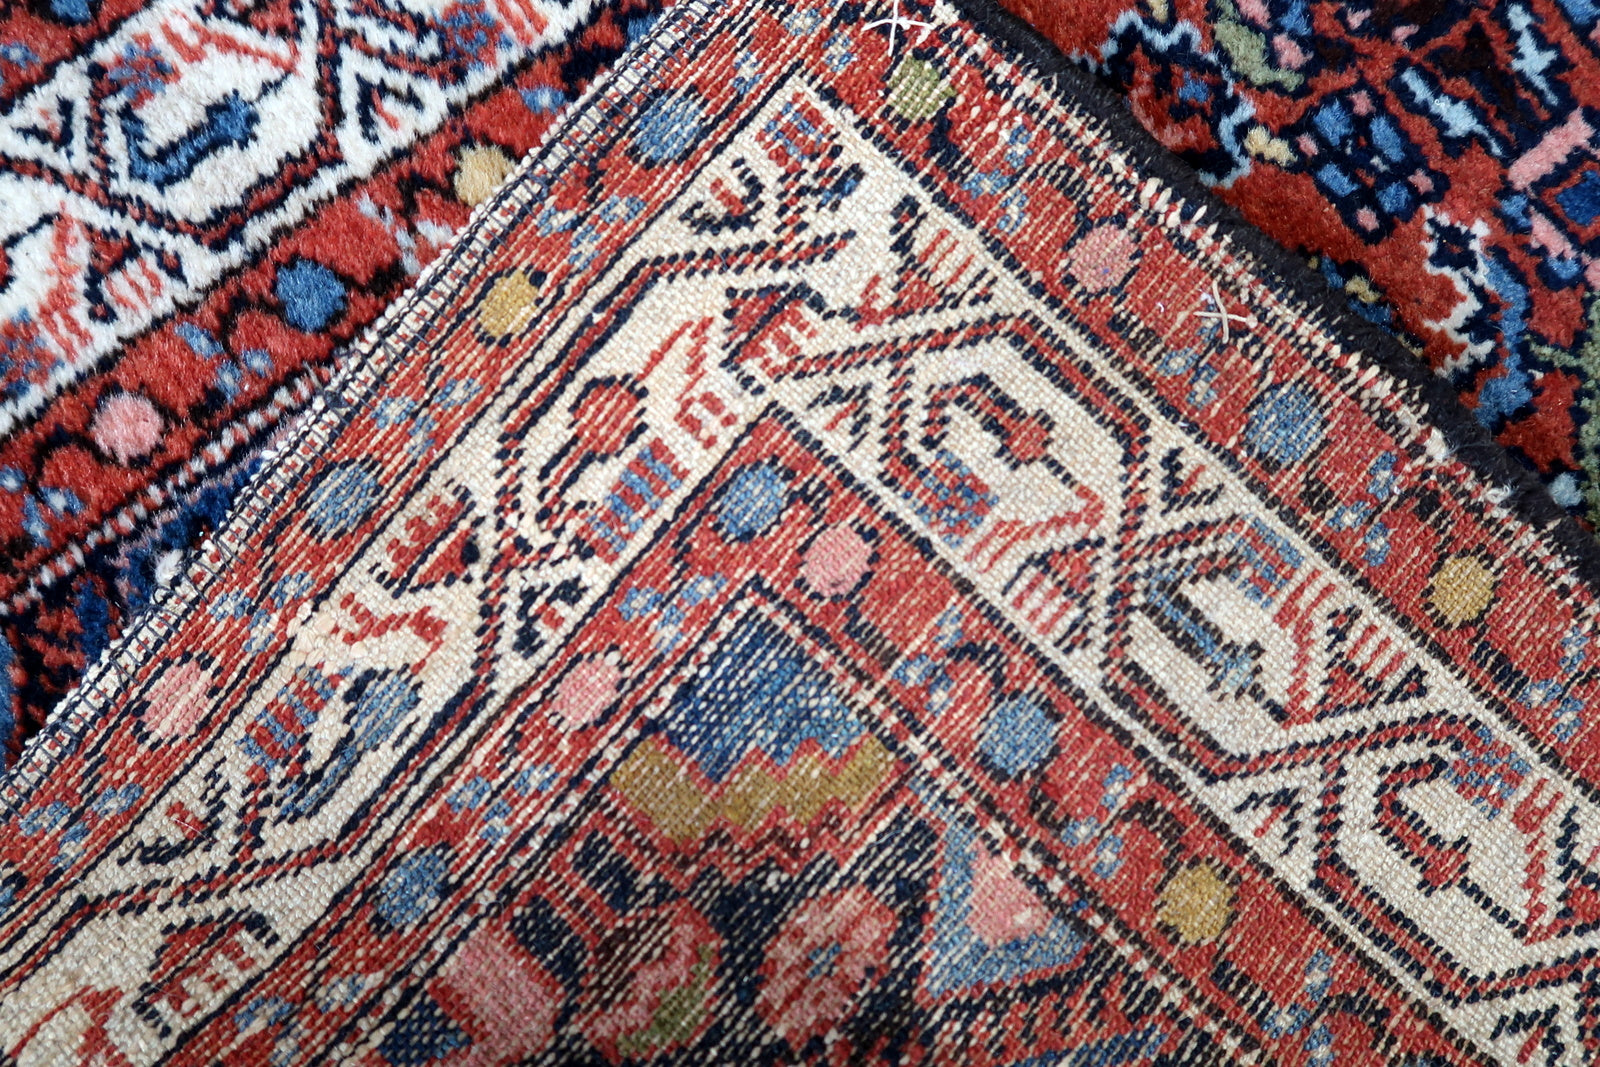 Back view of the vintage Persian rug highlighting its craftsmanship and size